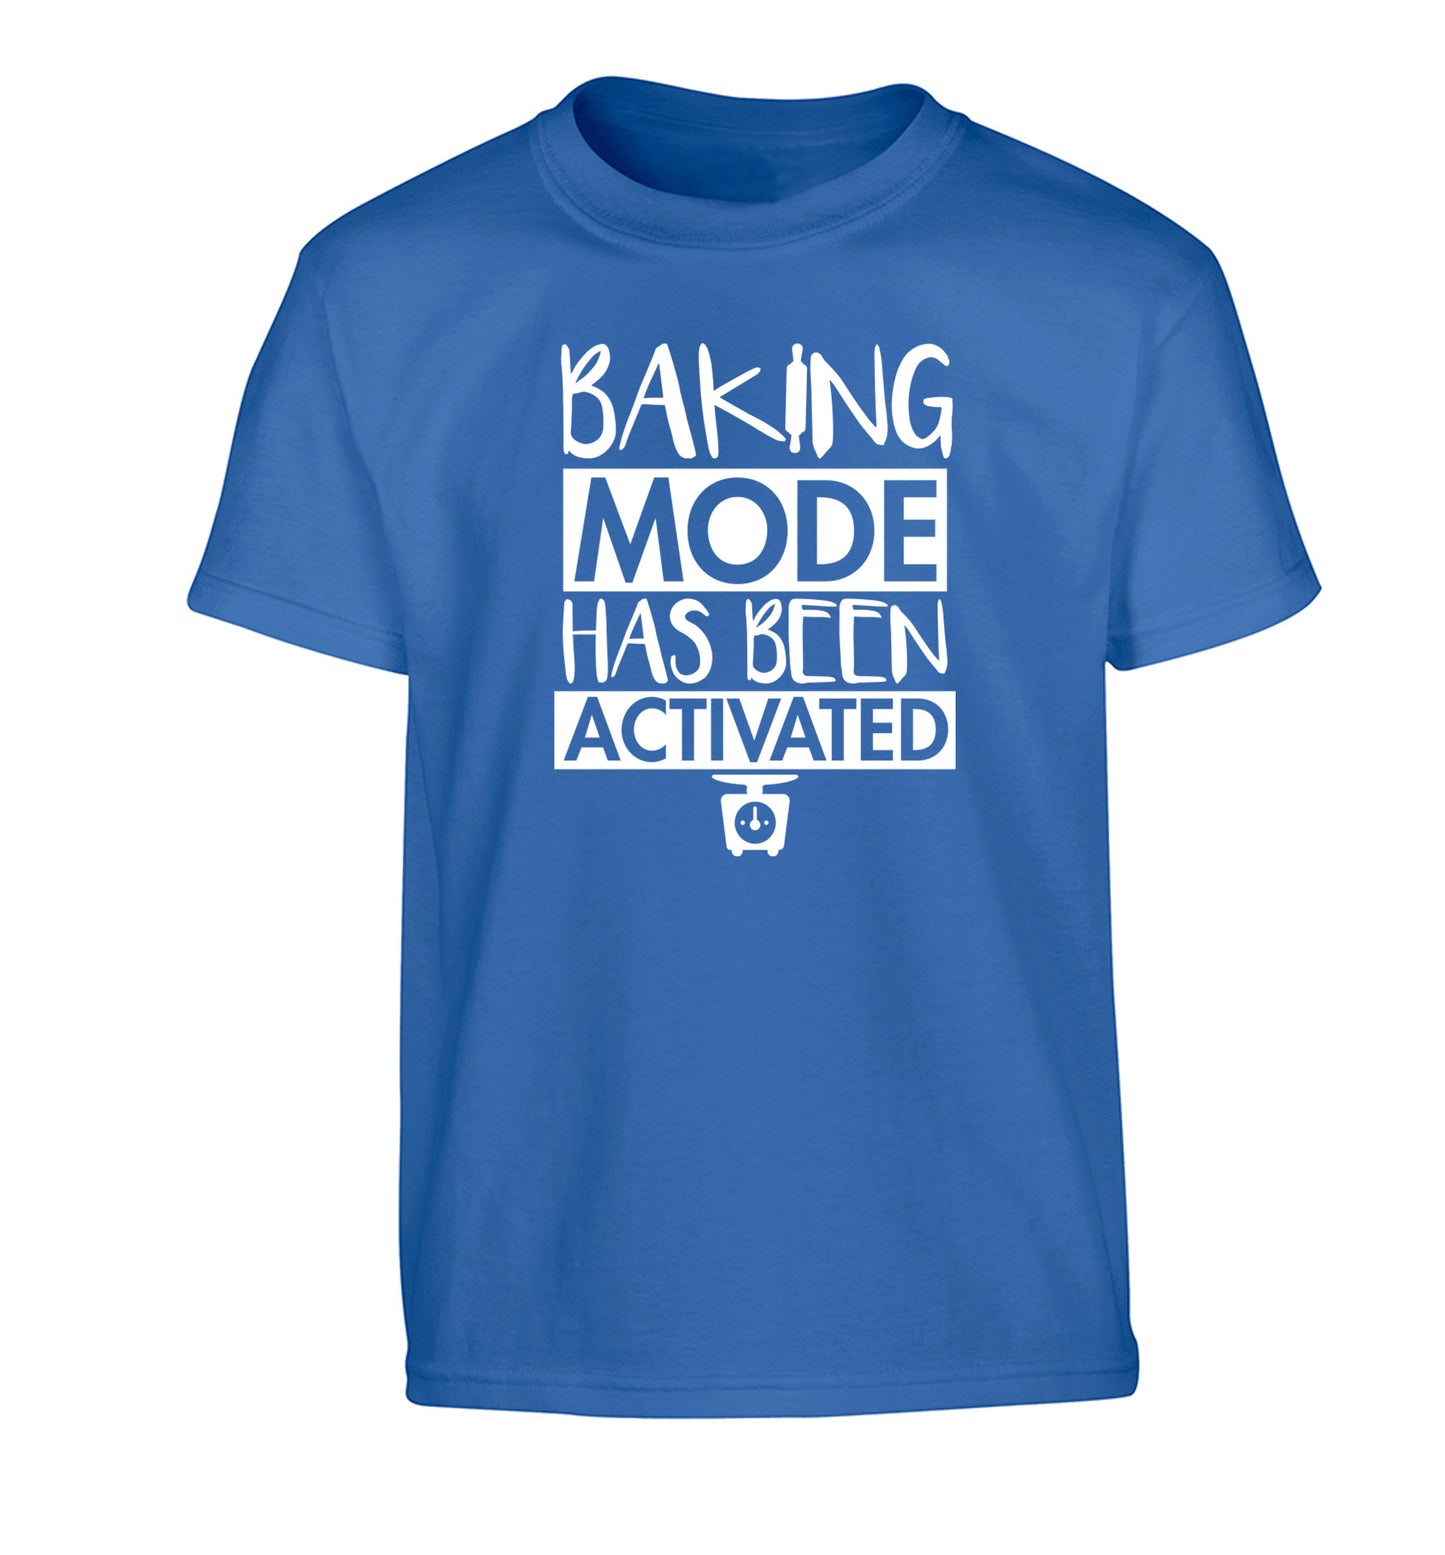 Baking mode has been activated Children's blue Tshirt 12-14 Years